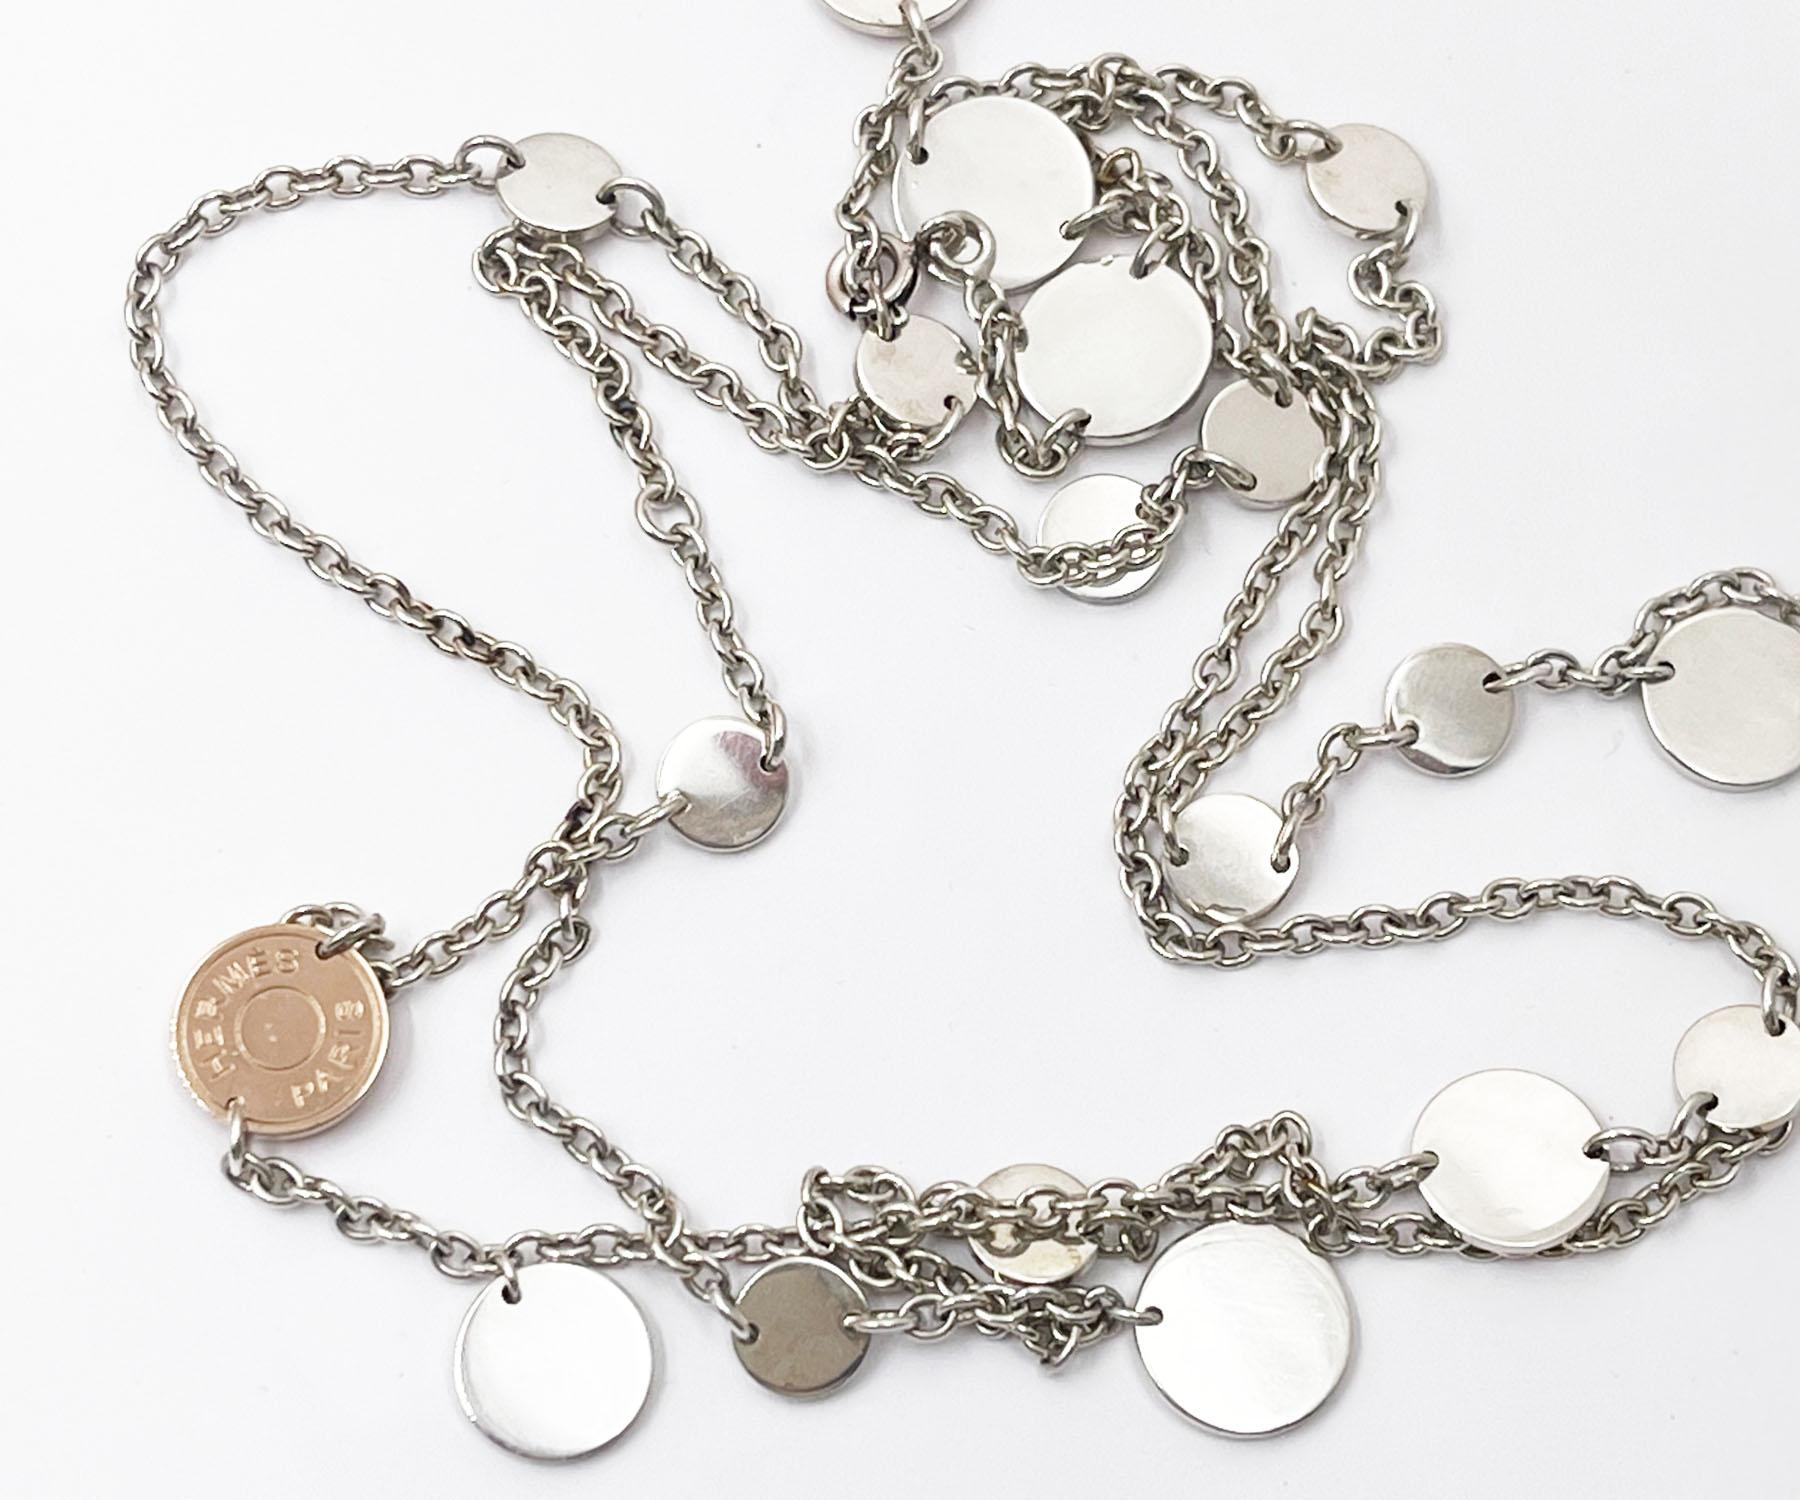 Hermes Silver 925 Gold 750 Confetti Necklace

* Marked Hermes
*Sterling 925 and Rose Gold 750
* Made in France

- It's approximately 33